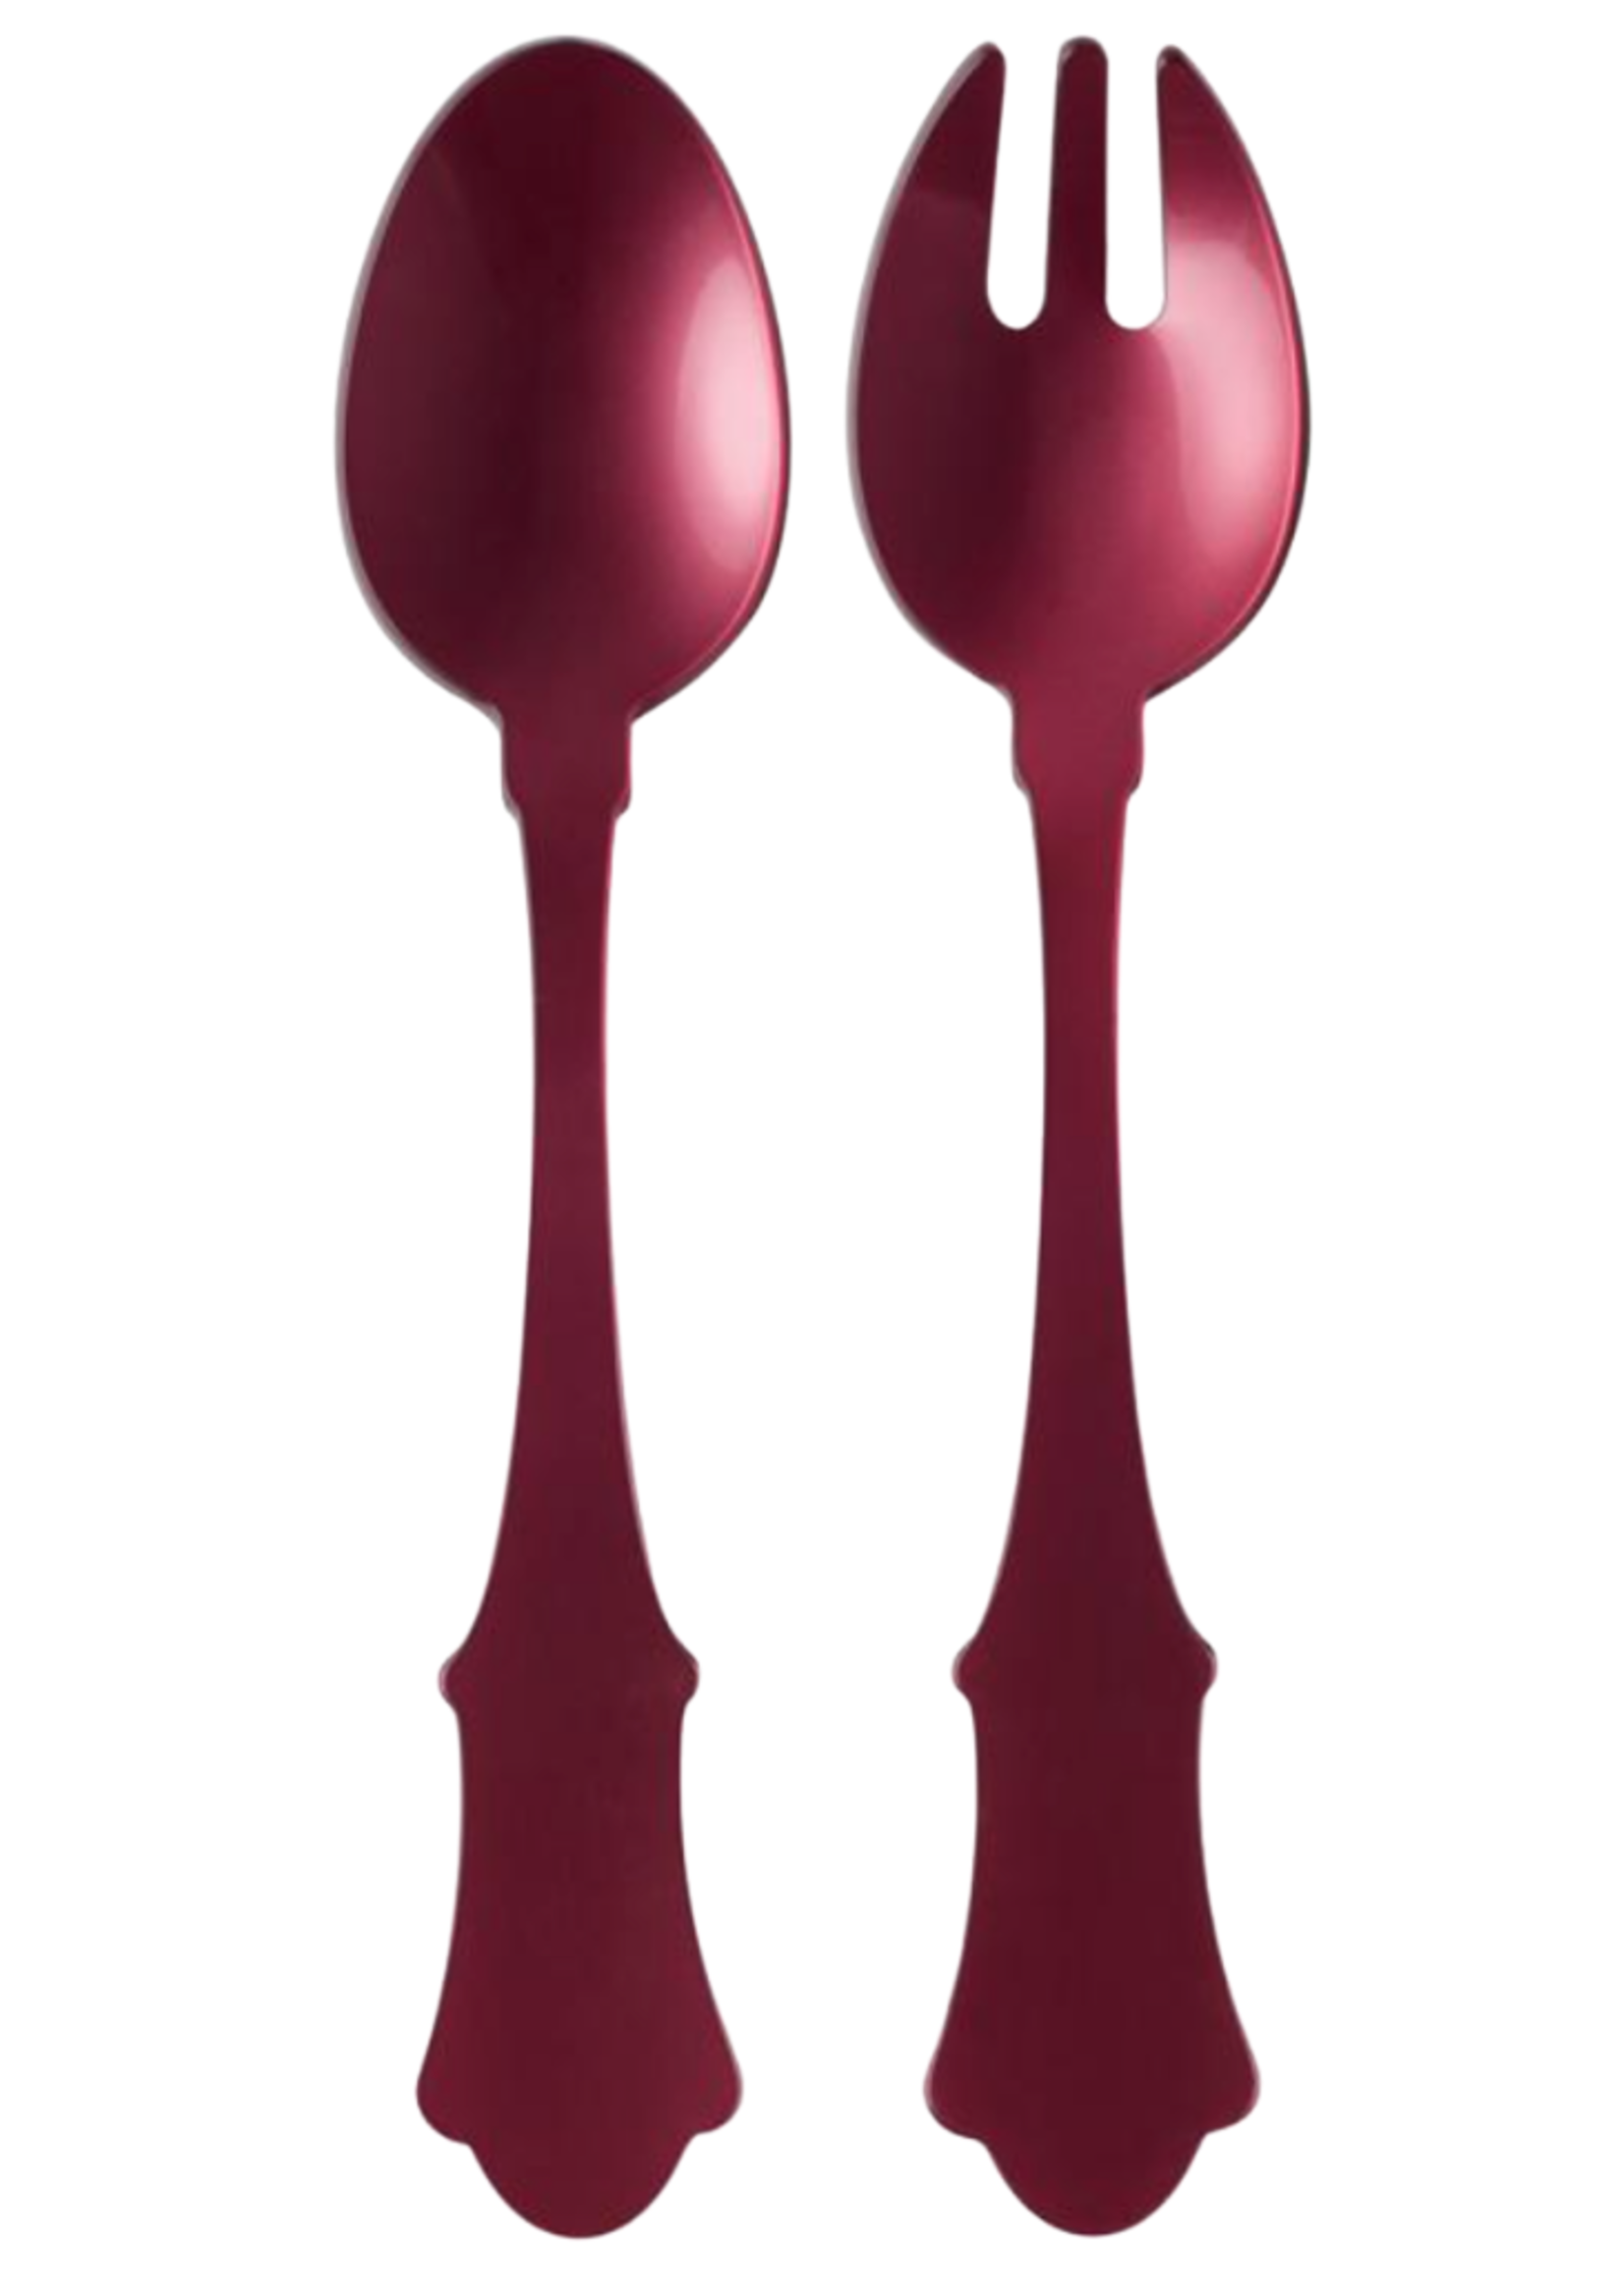 Old Fashioned Acrylic Salad Servers // Colors